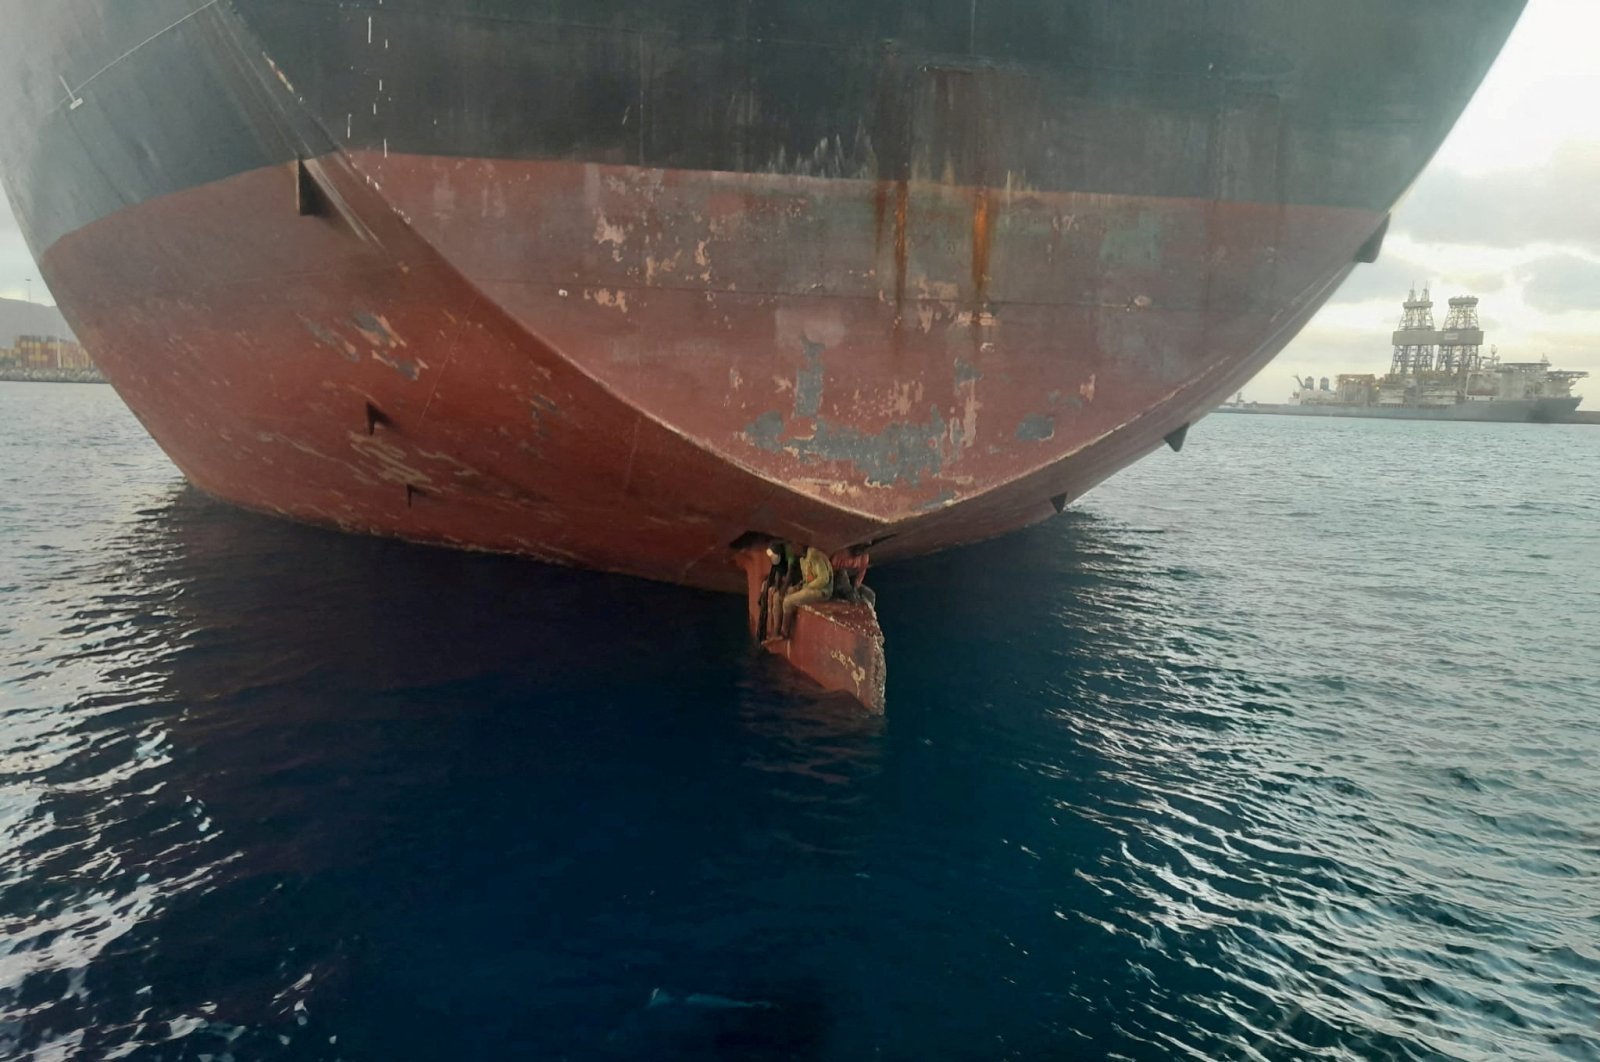 Three stowaway migrants are seen on the rudder blade of petrol vessel Althini II after traveling from Nigeria and before being rescued by Spanish coast guard, in this picture released on the Salvamento Maritimo official Twitter account, at sea near Las Palmas de Gran Canaria port, in the Canary Islands, Spain Nov. 28, 2022. (Salvamento Maritimo/Handout via Reuters)